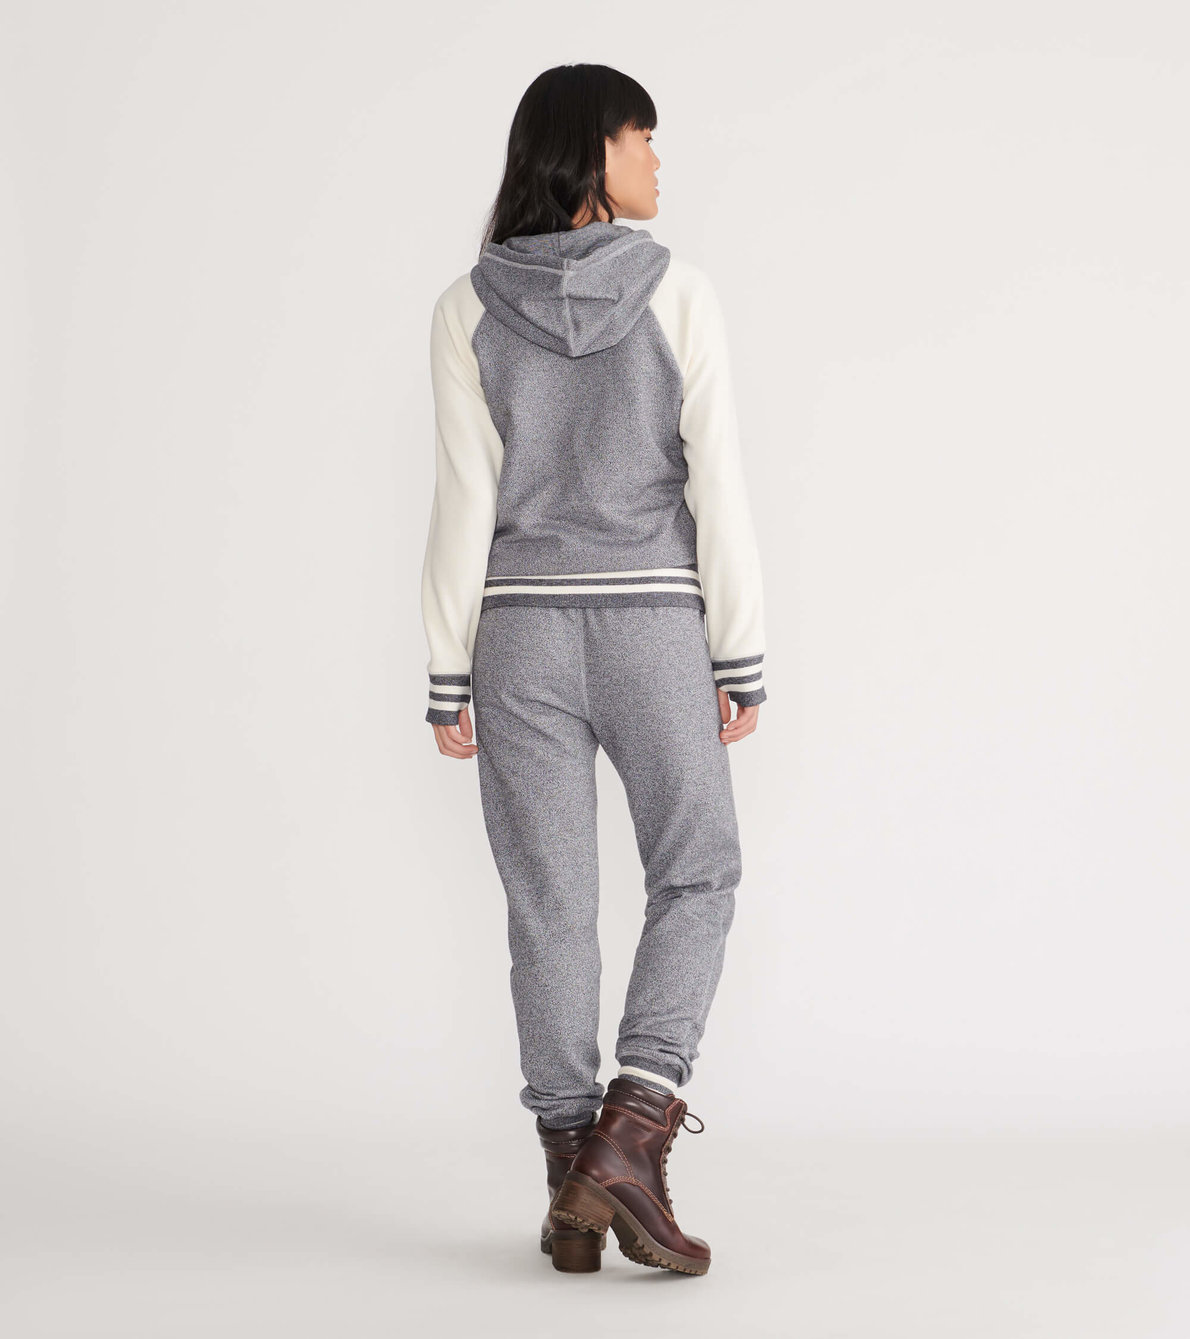 View larger image of Marled Grey Moose Women's Heritage Separates with Pullover Hoodie